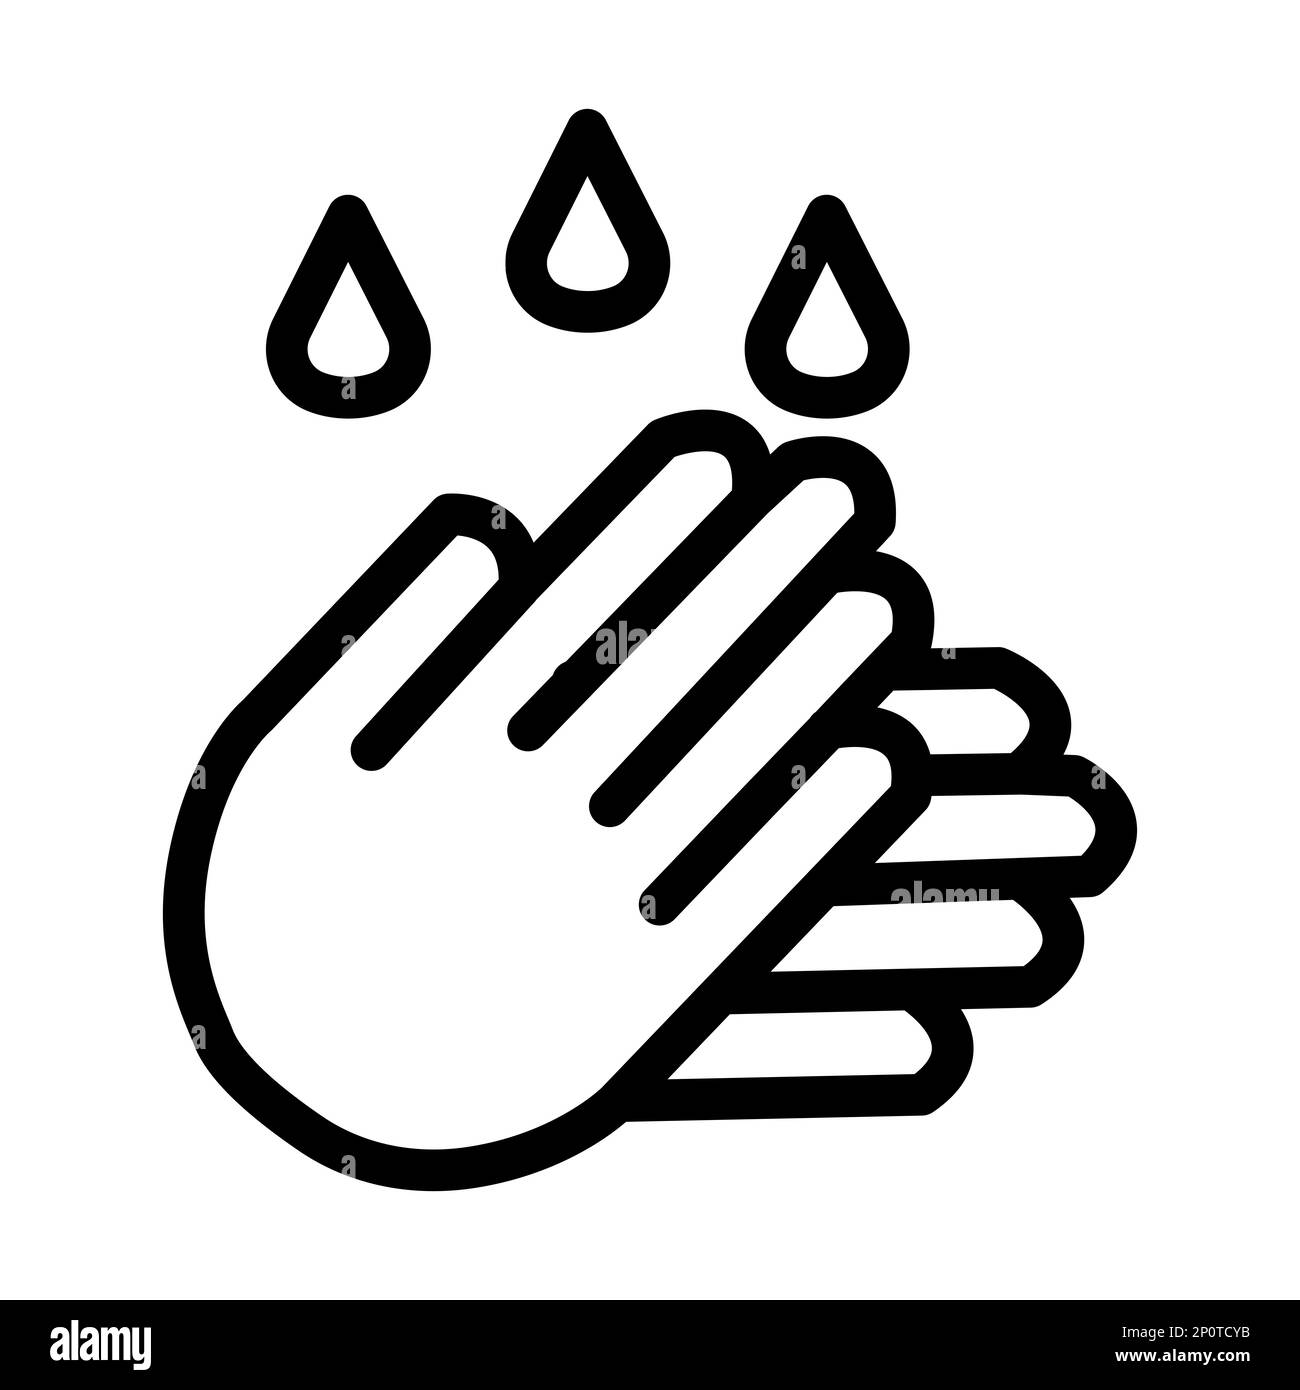 Hand Washing Vector Thick Line Icon For Personal And Commercial Use. Stock Photo